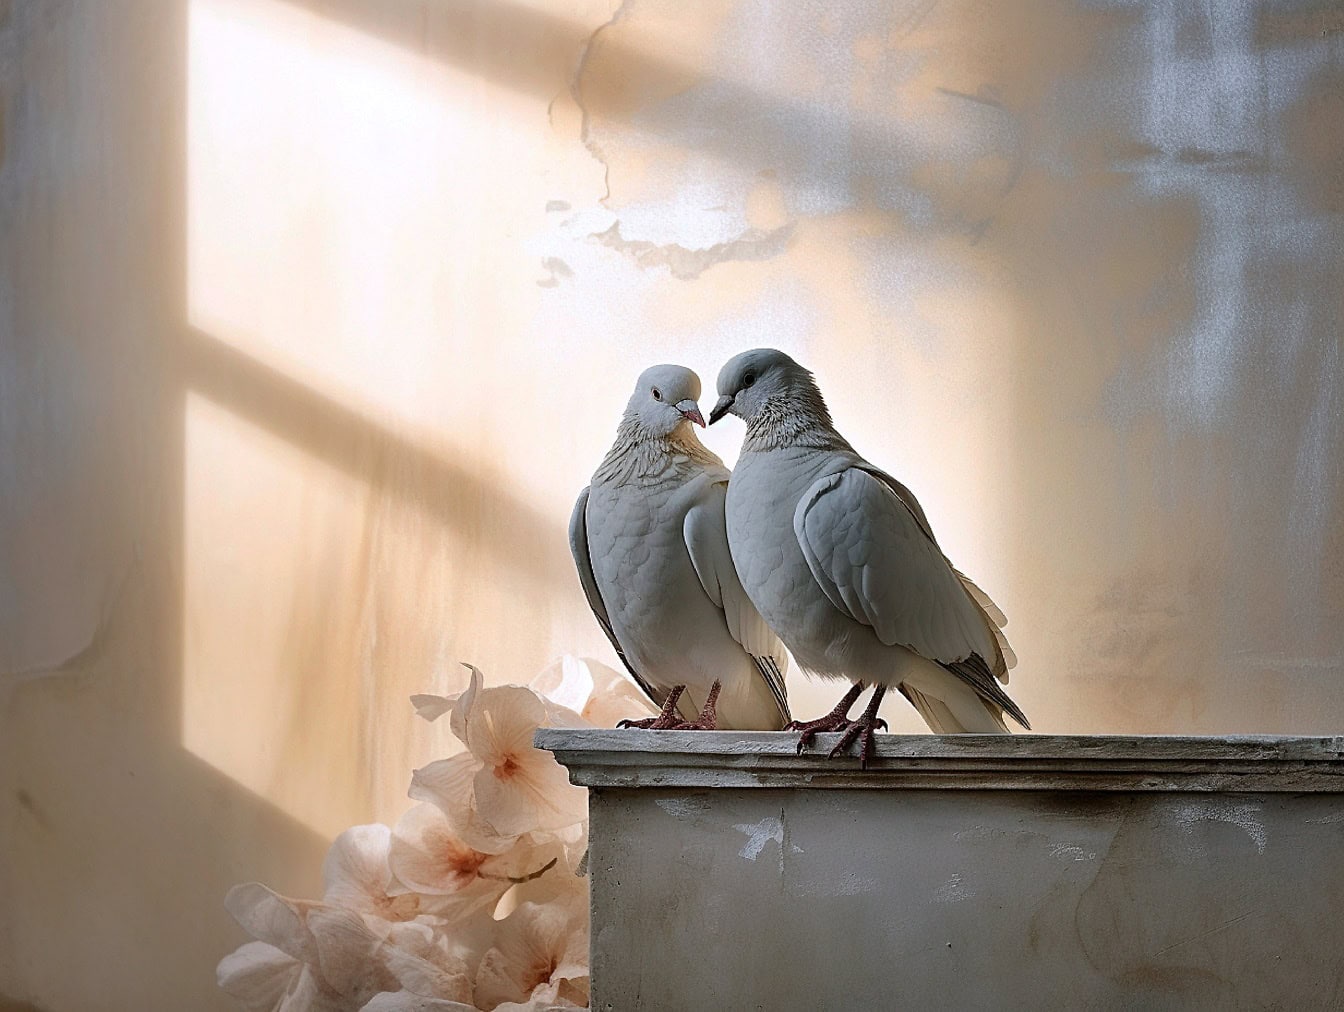 Romantic set with white pigeon and dove standing in semi shade with pastel flowers in the background